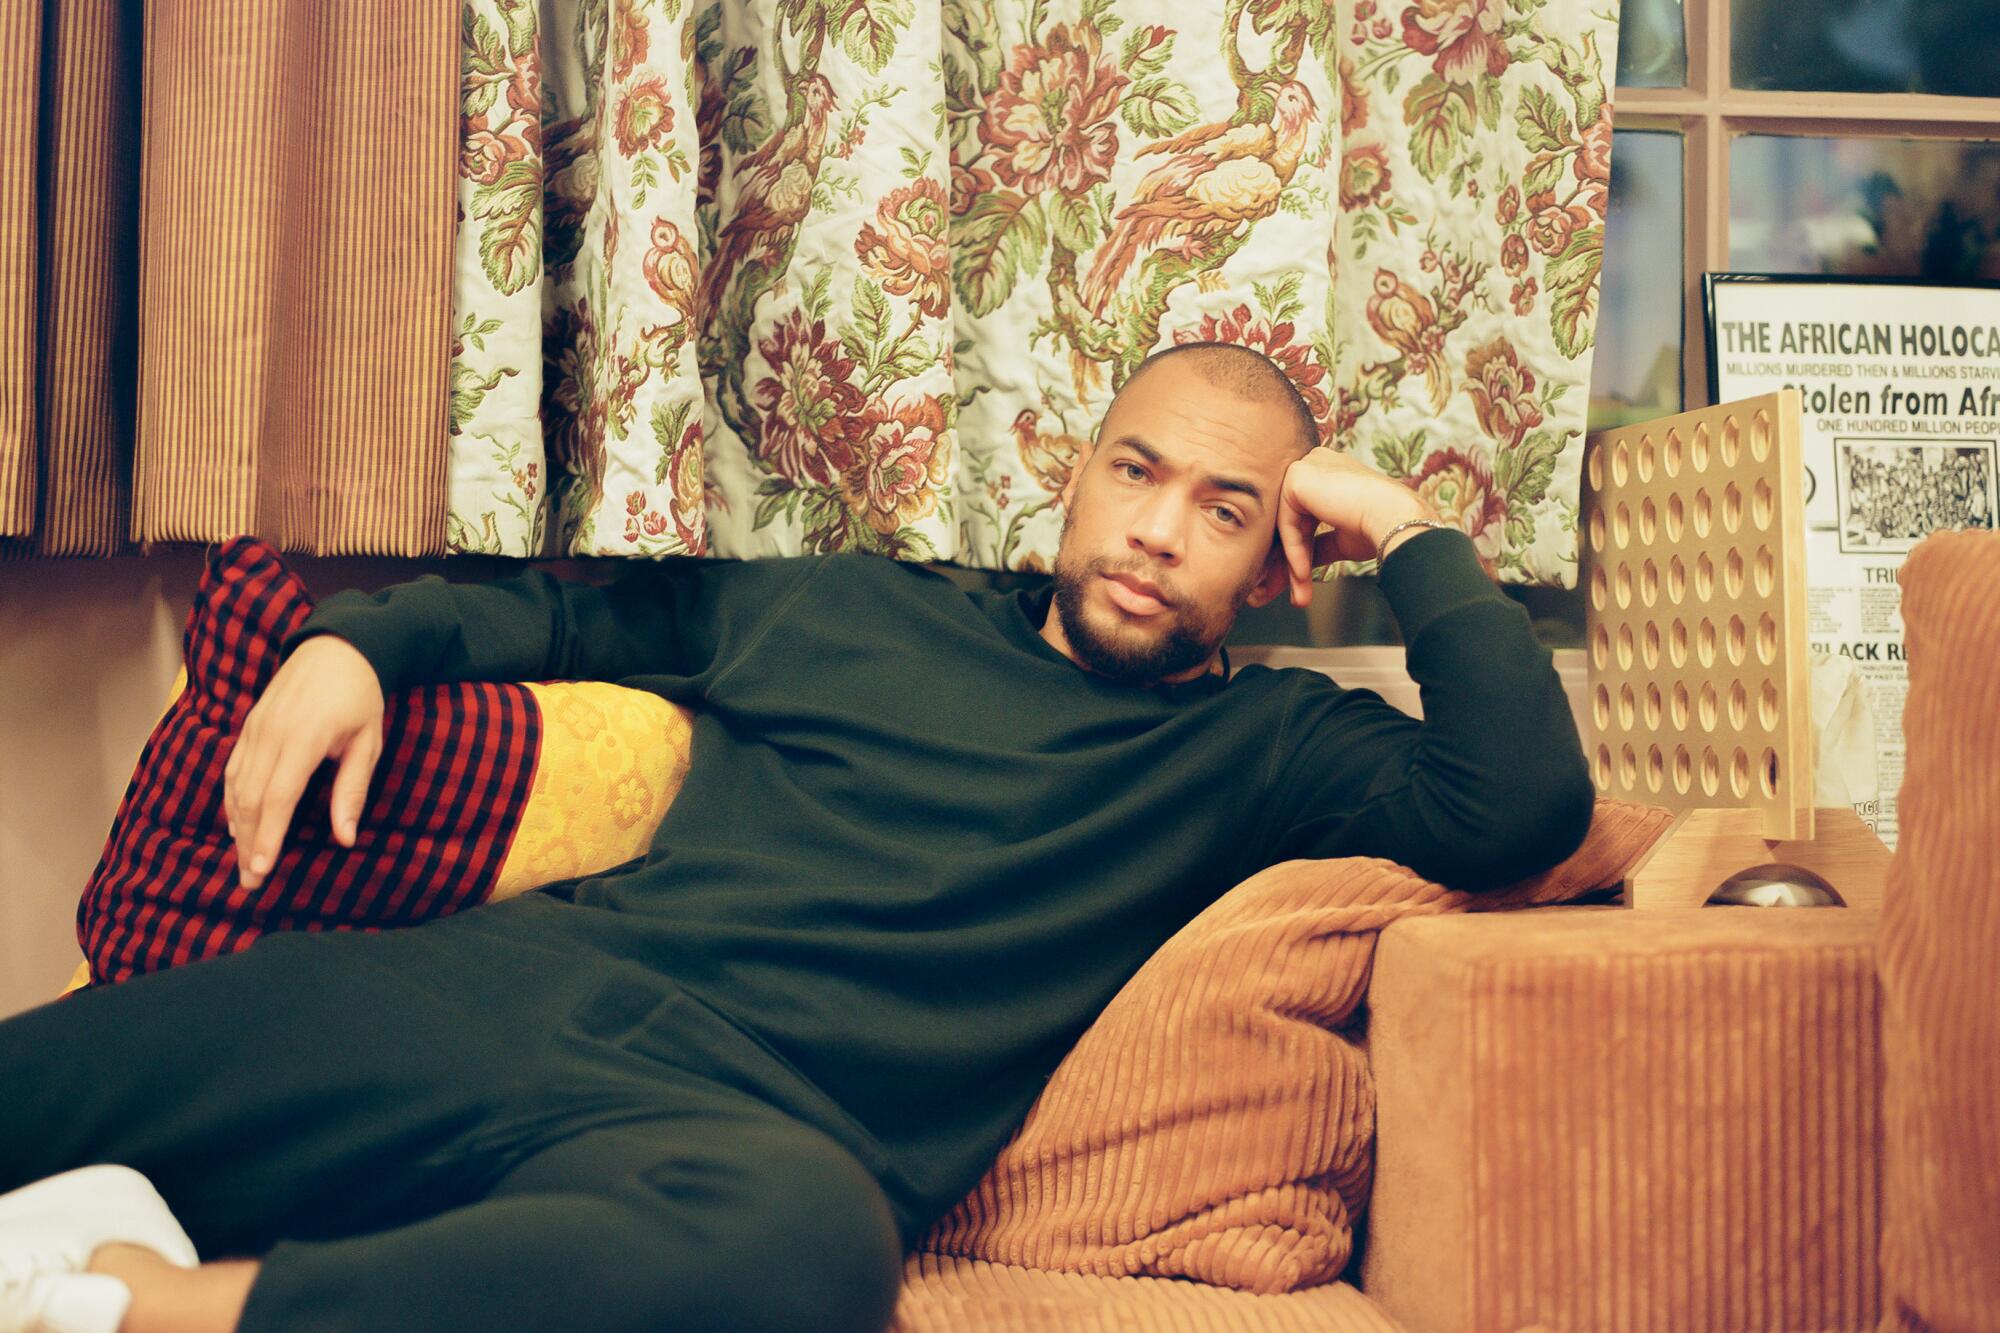 Kendrick Sampson for the issue 07 of Image magazine. Sampson was photographed at Reparations Club